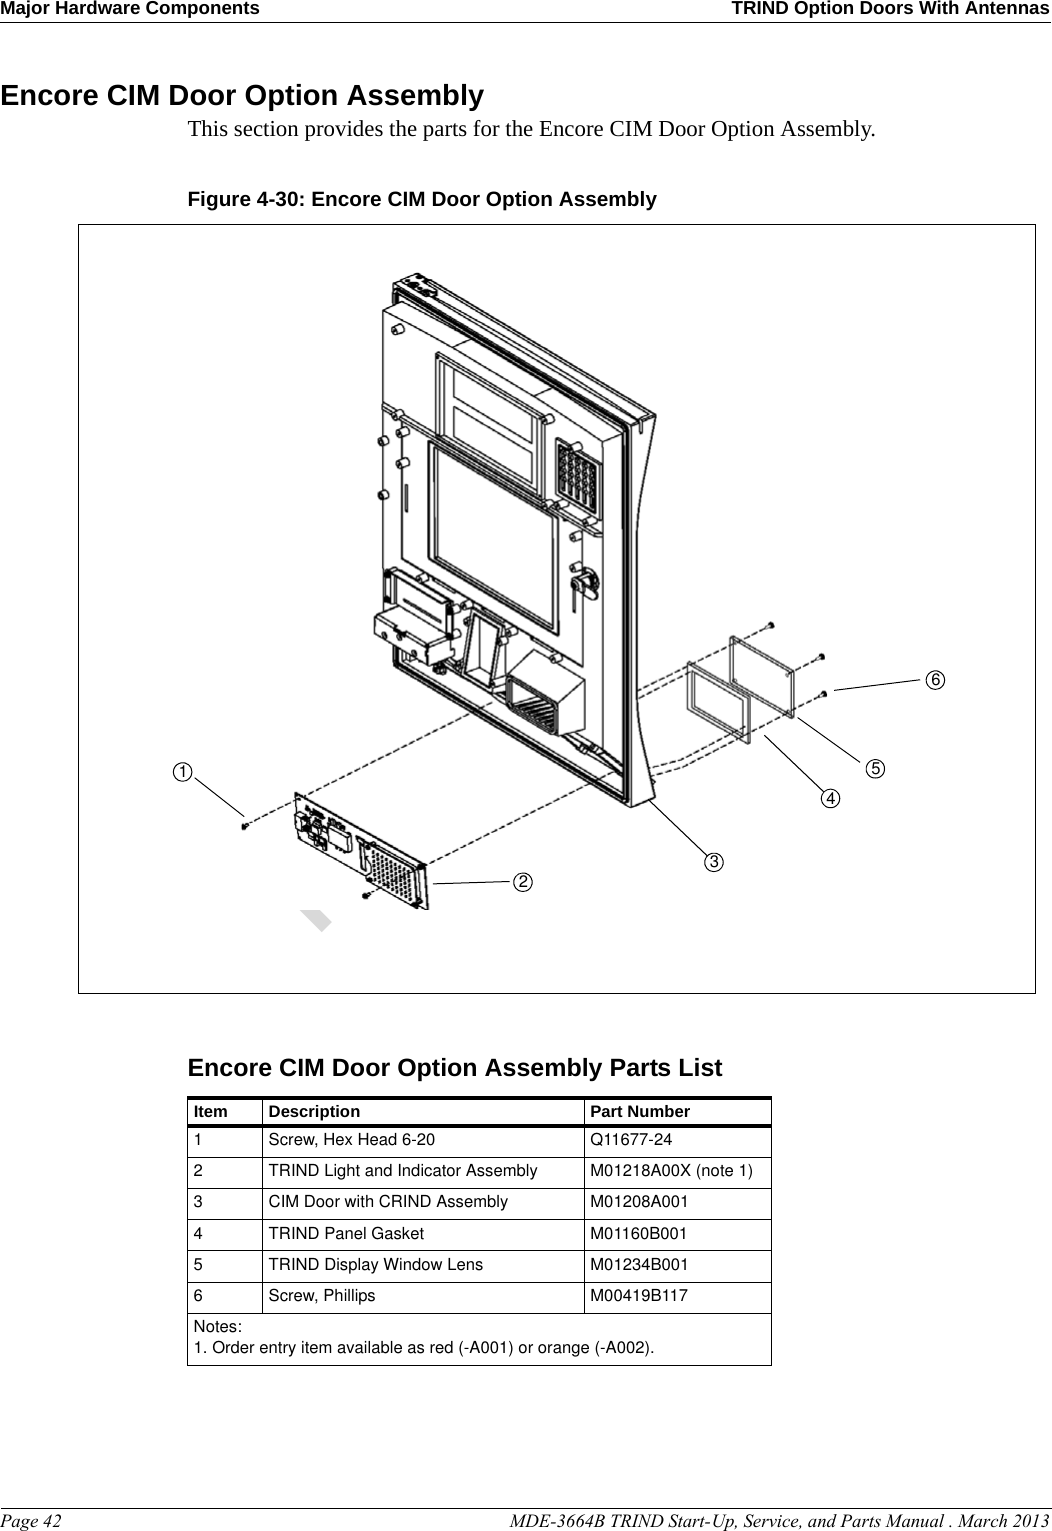 Major Hardware Components TRIND Option Doors With AntennasPage 42                                                                                                  MDE-3664B TRIND Start-Up, Service, and Parts Manual . March 2013PreliminaryEncore CIM Door Option AssemblyThis section provides the parts for the Encore CIM Door Option Assembly.Figure 4-30: 654321Encore CIM Door Option AssemblyEncore CIM Door Option Assembly Parts ListItem Description Part Number1Screw, Hex Head 6-20 Q11677-242TRIND Light and Indicator Assembly M01218A00X (note 1)3CIM Door with CRIND Assembly M01208A0014TRIND Panel Gasket M01160B0015TRIND Display Window Lens M01234B0016Screw, Phillips M00419B117Notes:1. Order entry item available as red (-A001) or orange (-A002).